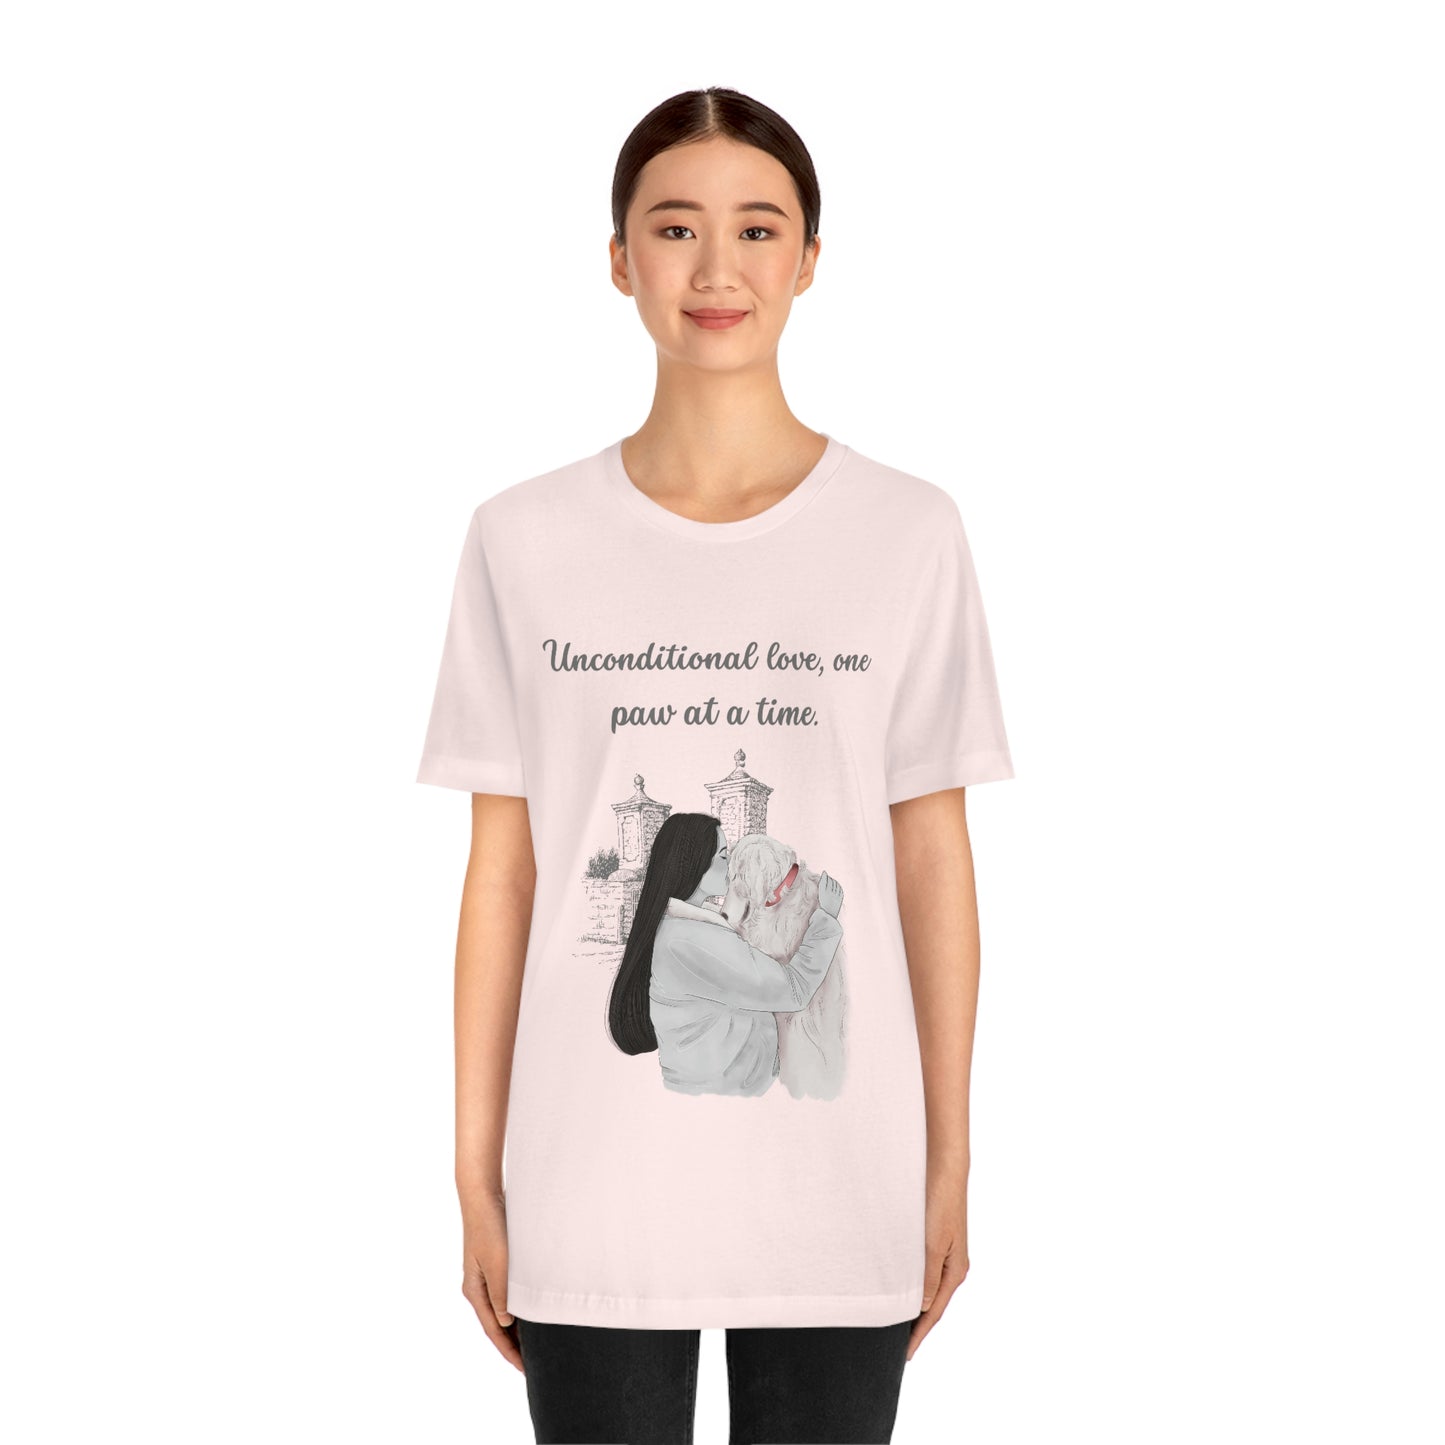 Dog Printed T-Shirt - Unconditional love, one  paw at a time - Unisex Jersey Short Sleeve Tee